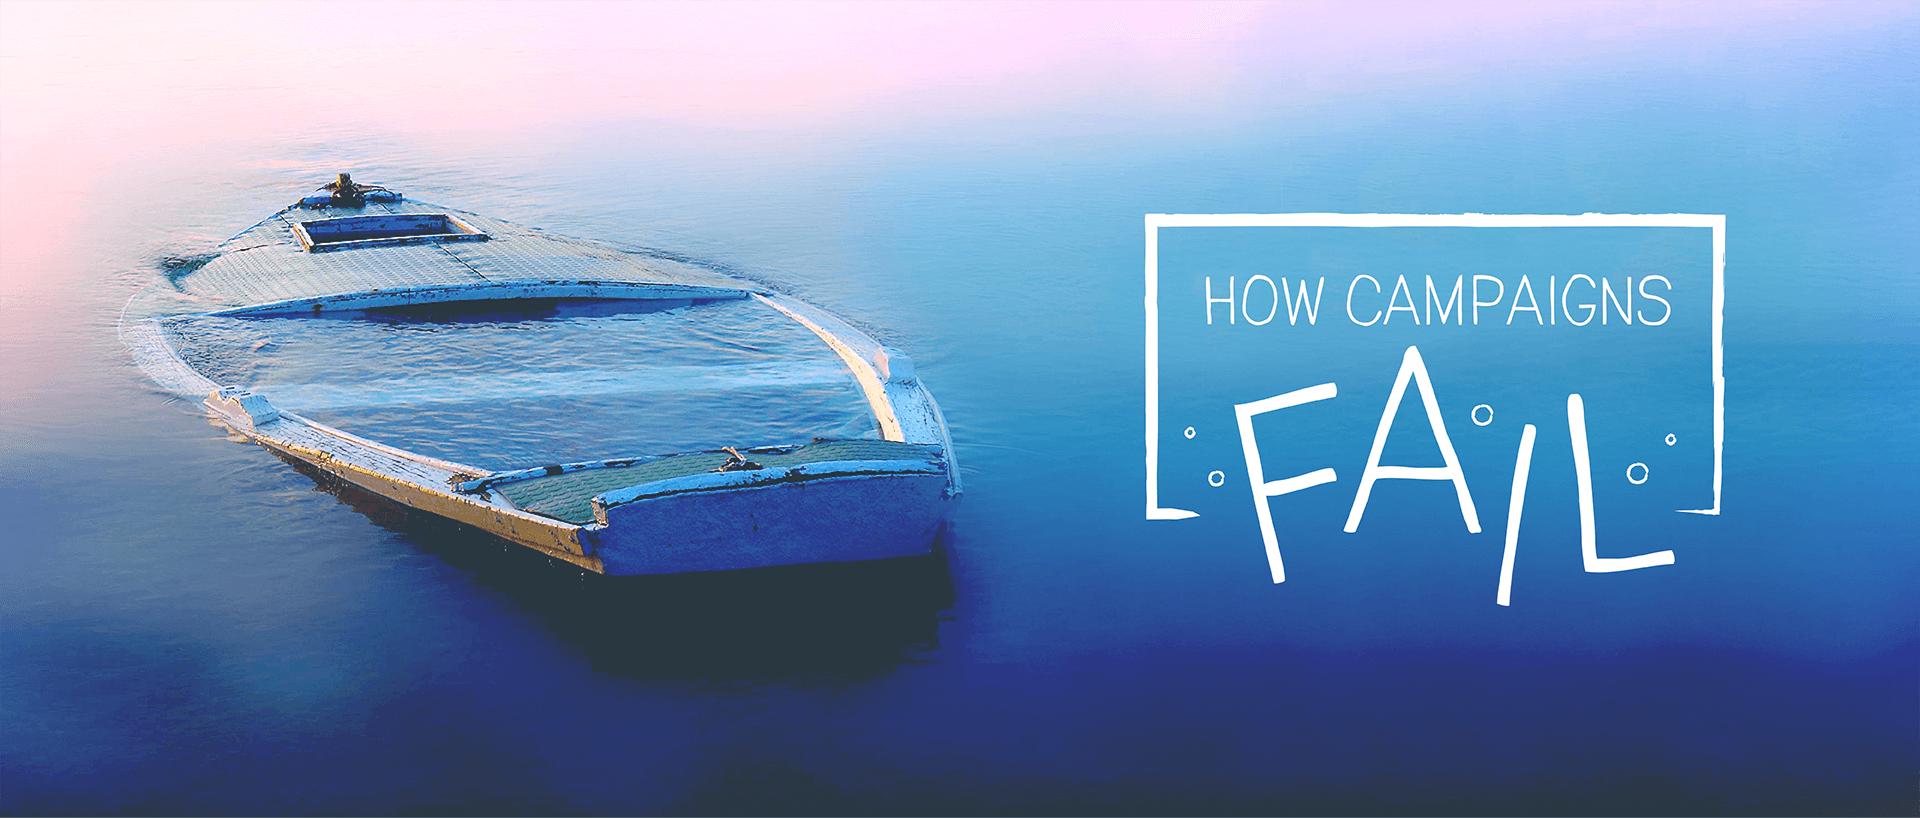 Photo of a sinking boat with the caption "How Campaigns Fail"